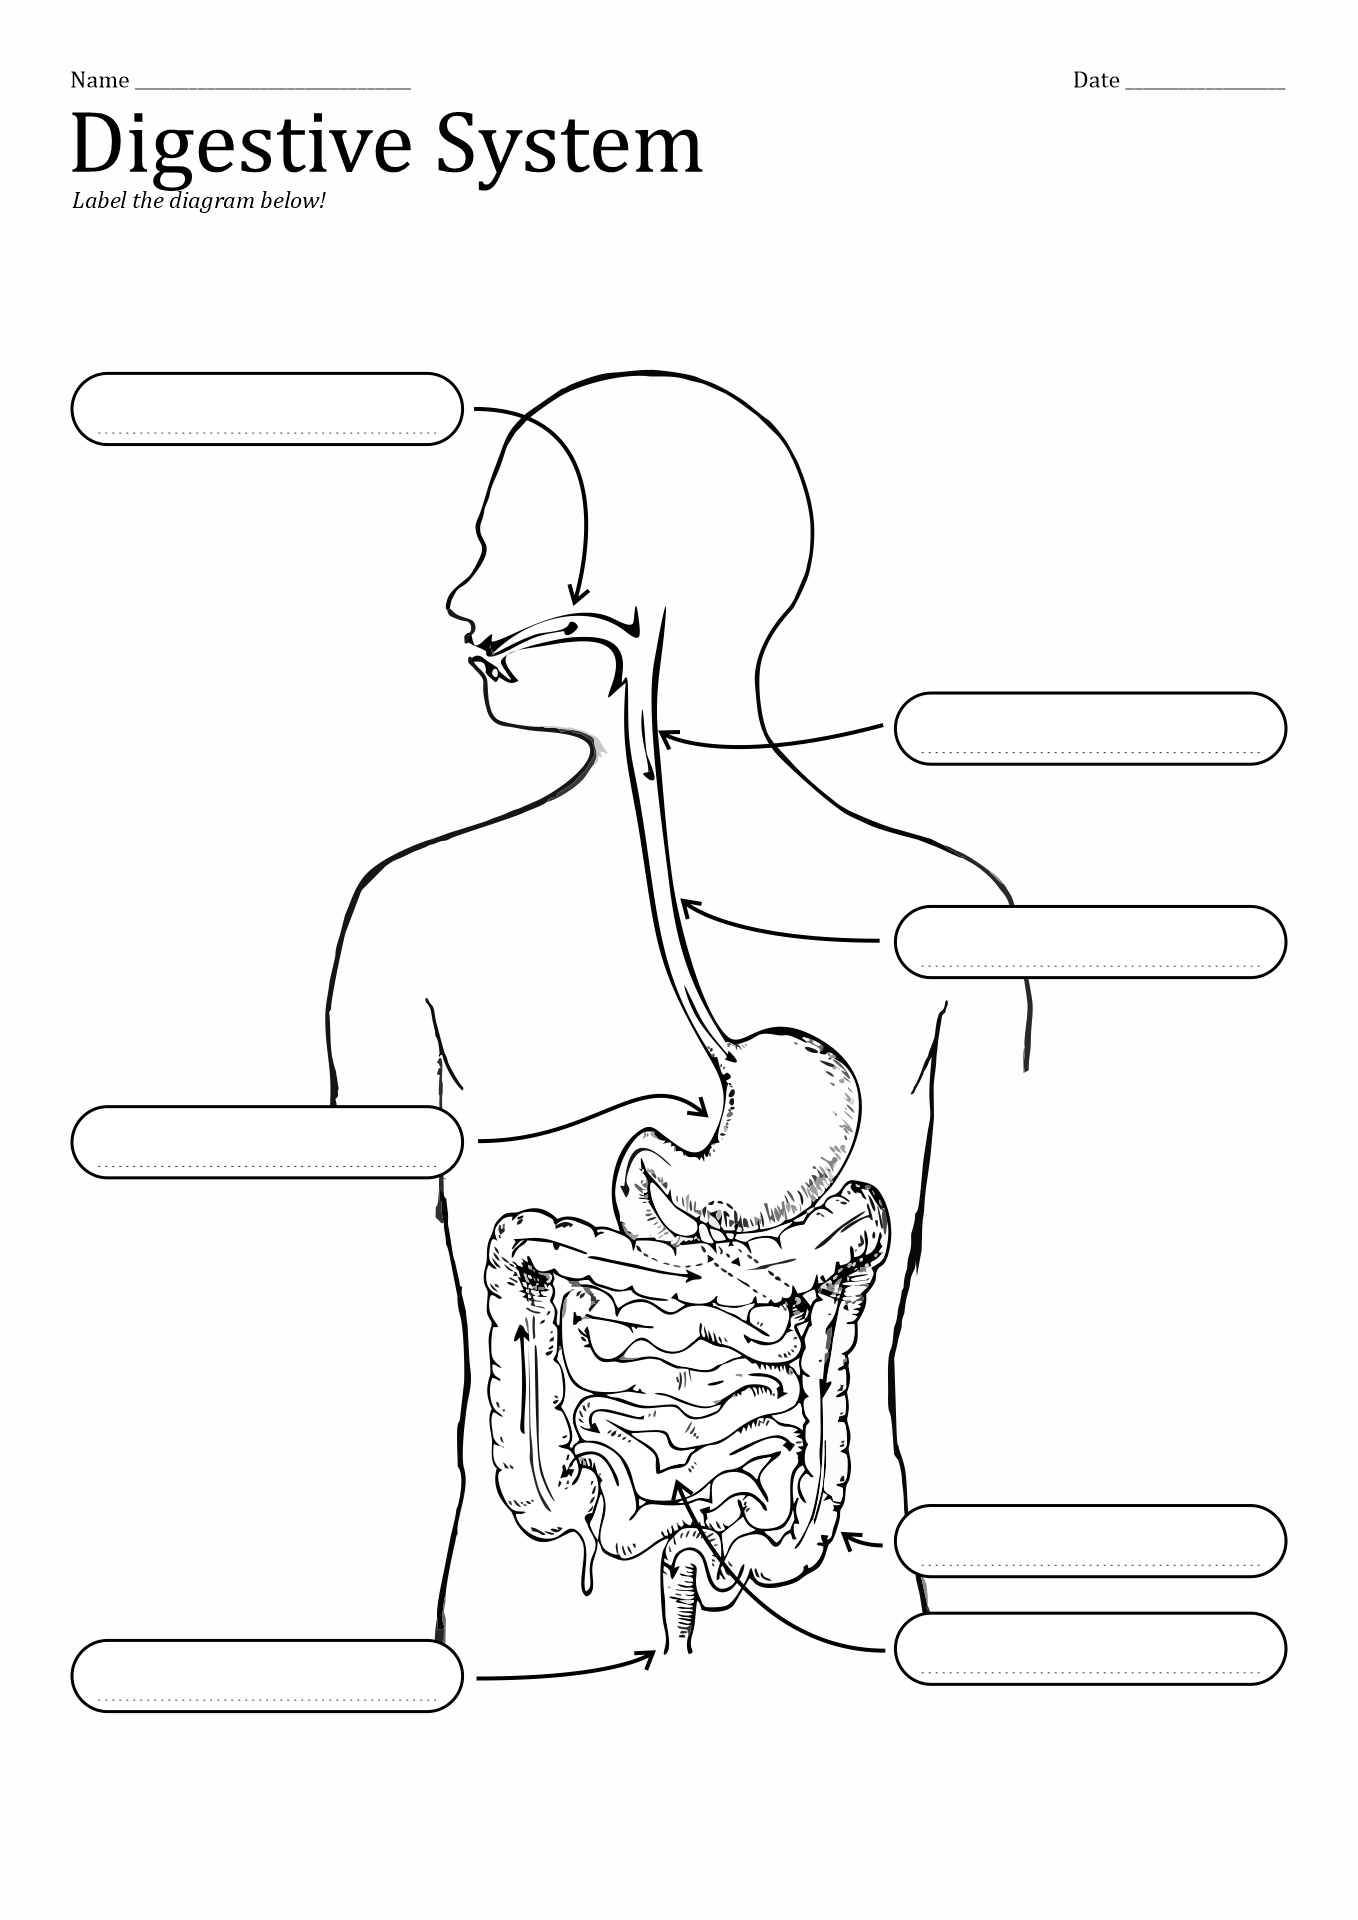 Blank Digestive Tract Diagram